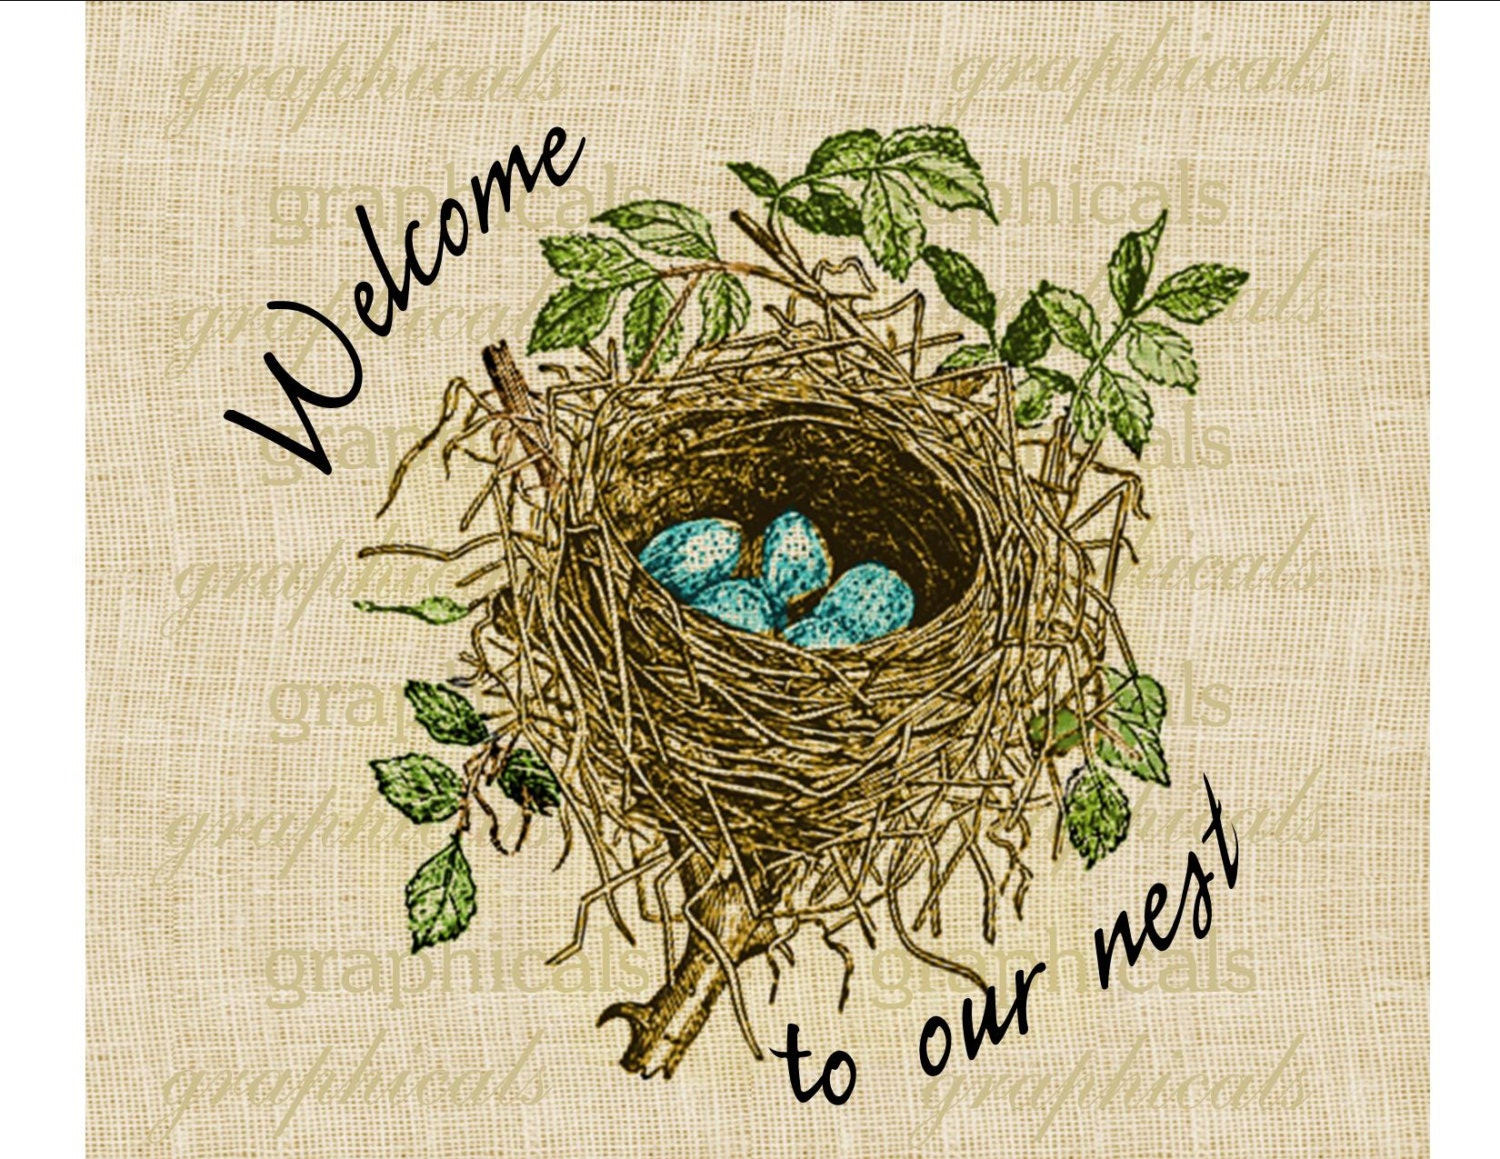 Welcome Spring Nest Blue eggs Digital download image for iron on fabric transfer burlap decoupage pillows cards scrapbook No. 1817